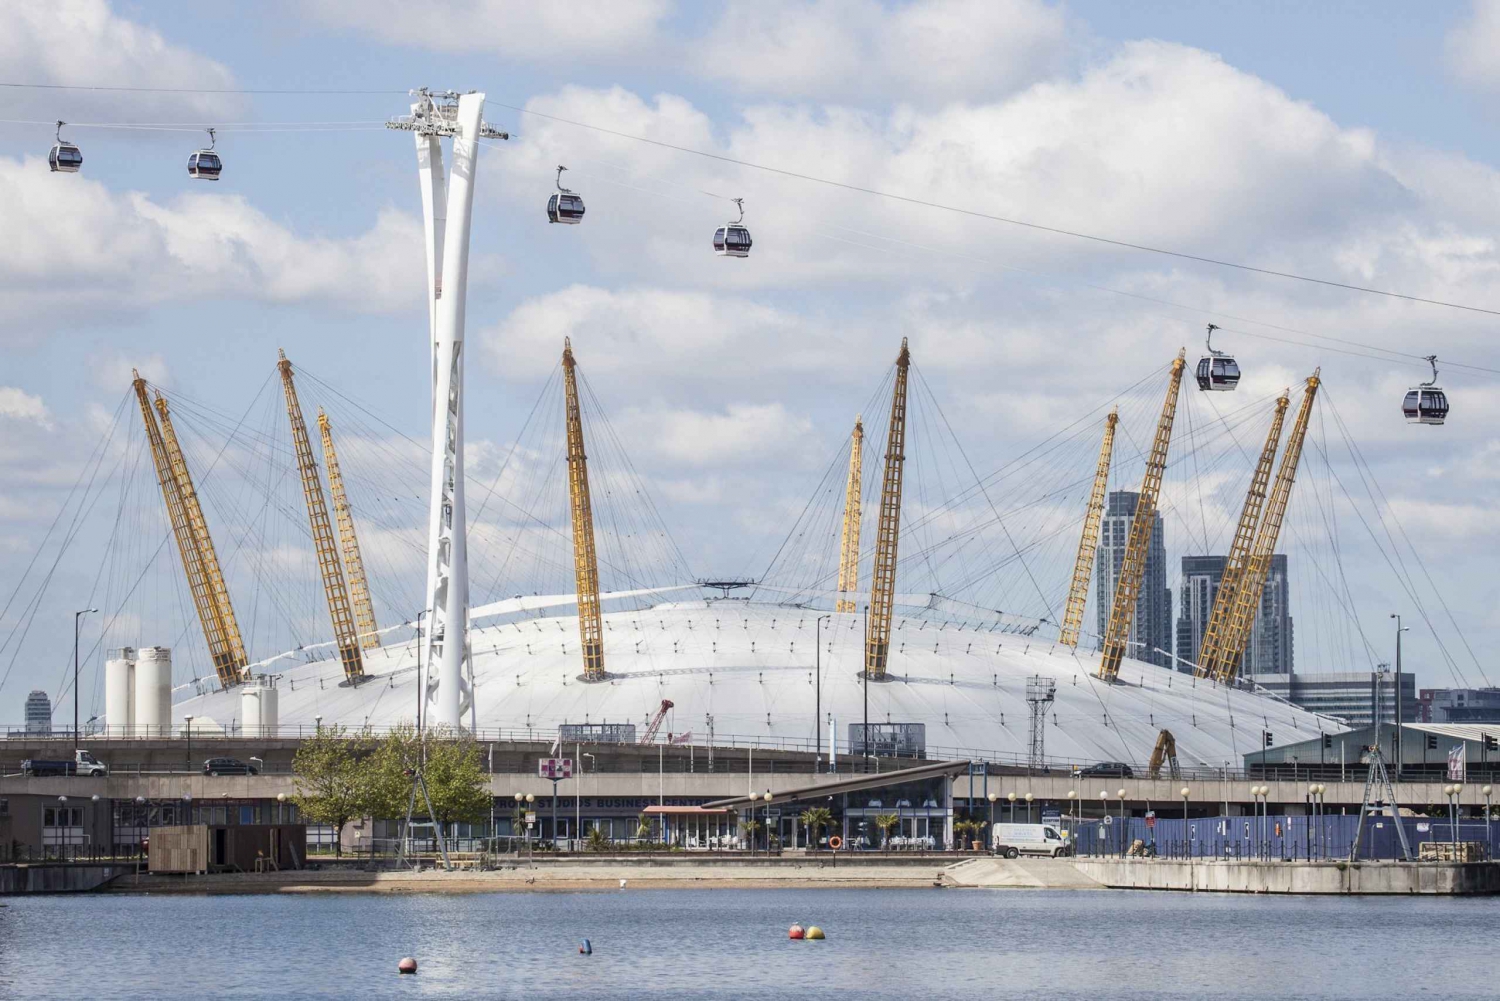 London: Westminster Tour, Climb The O2 Arena, and Cable Car